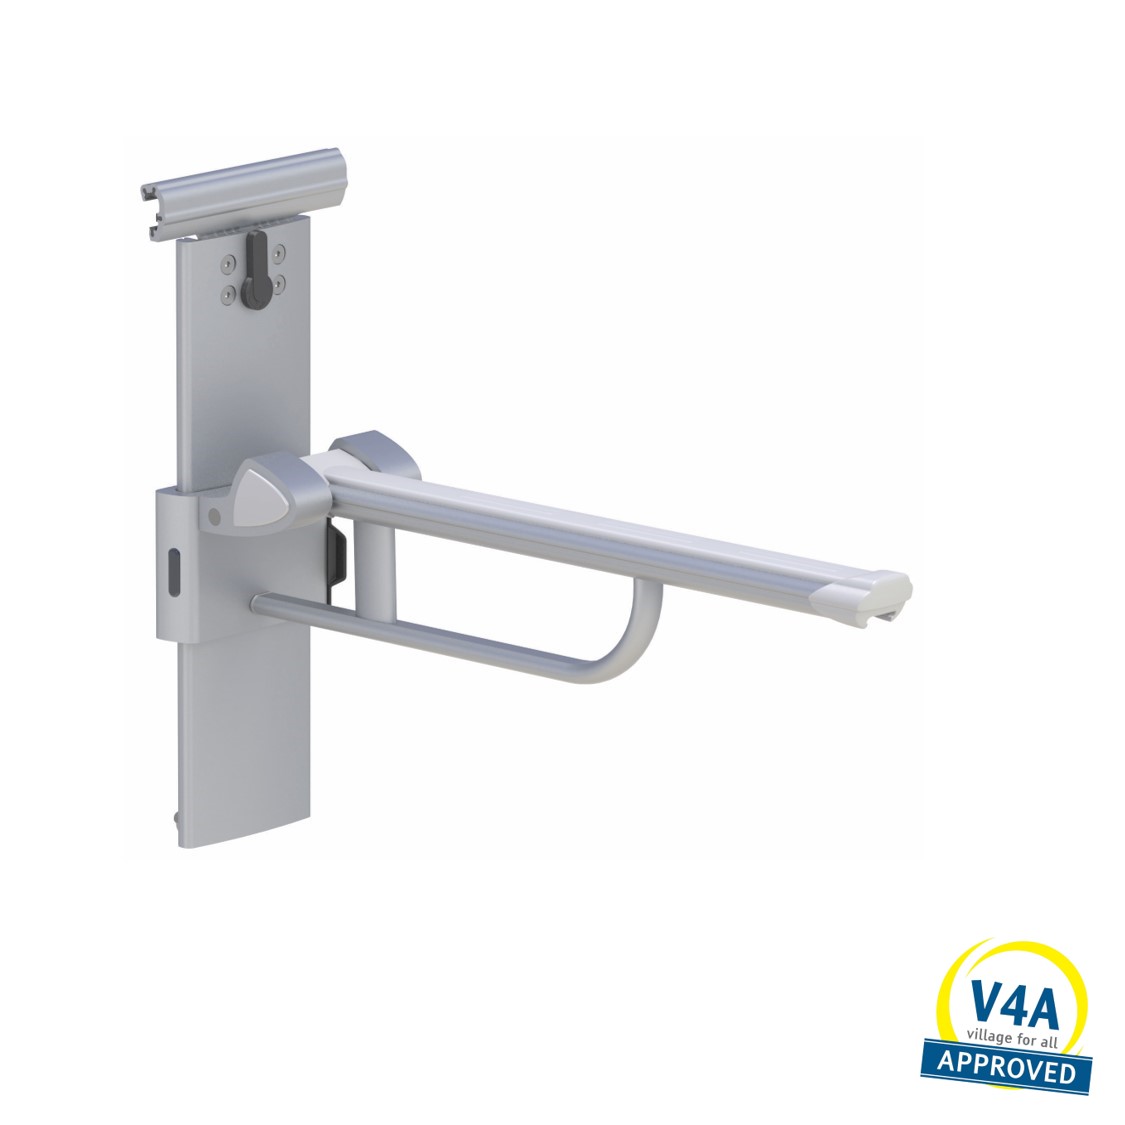 Lift-up arm support for horizontal track, height and sideways adjustable